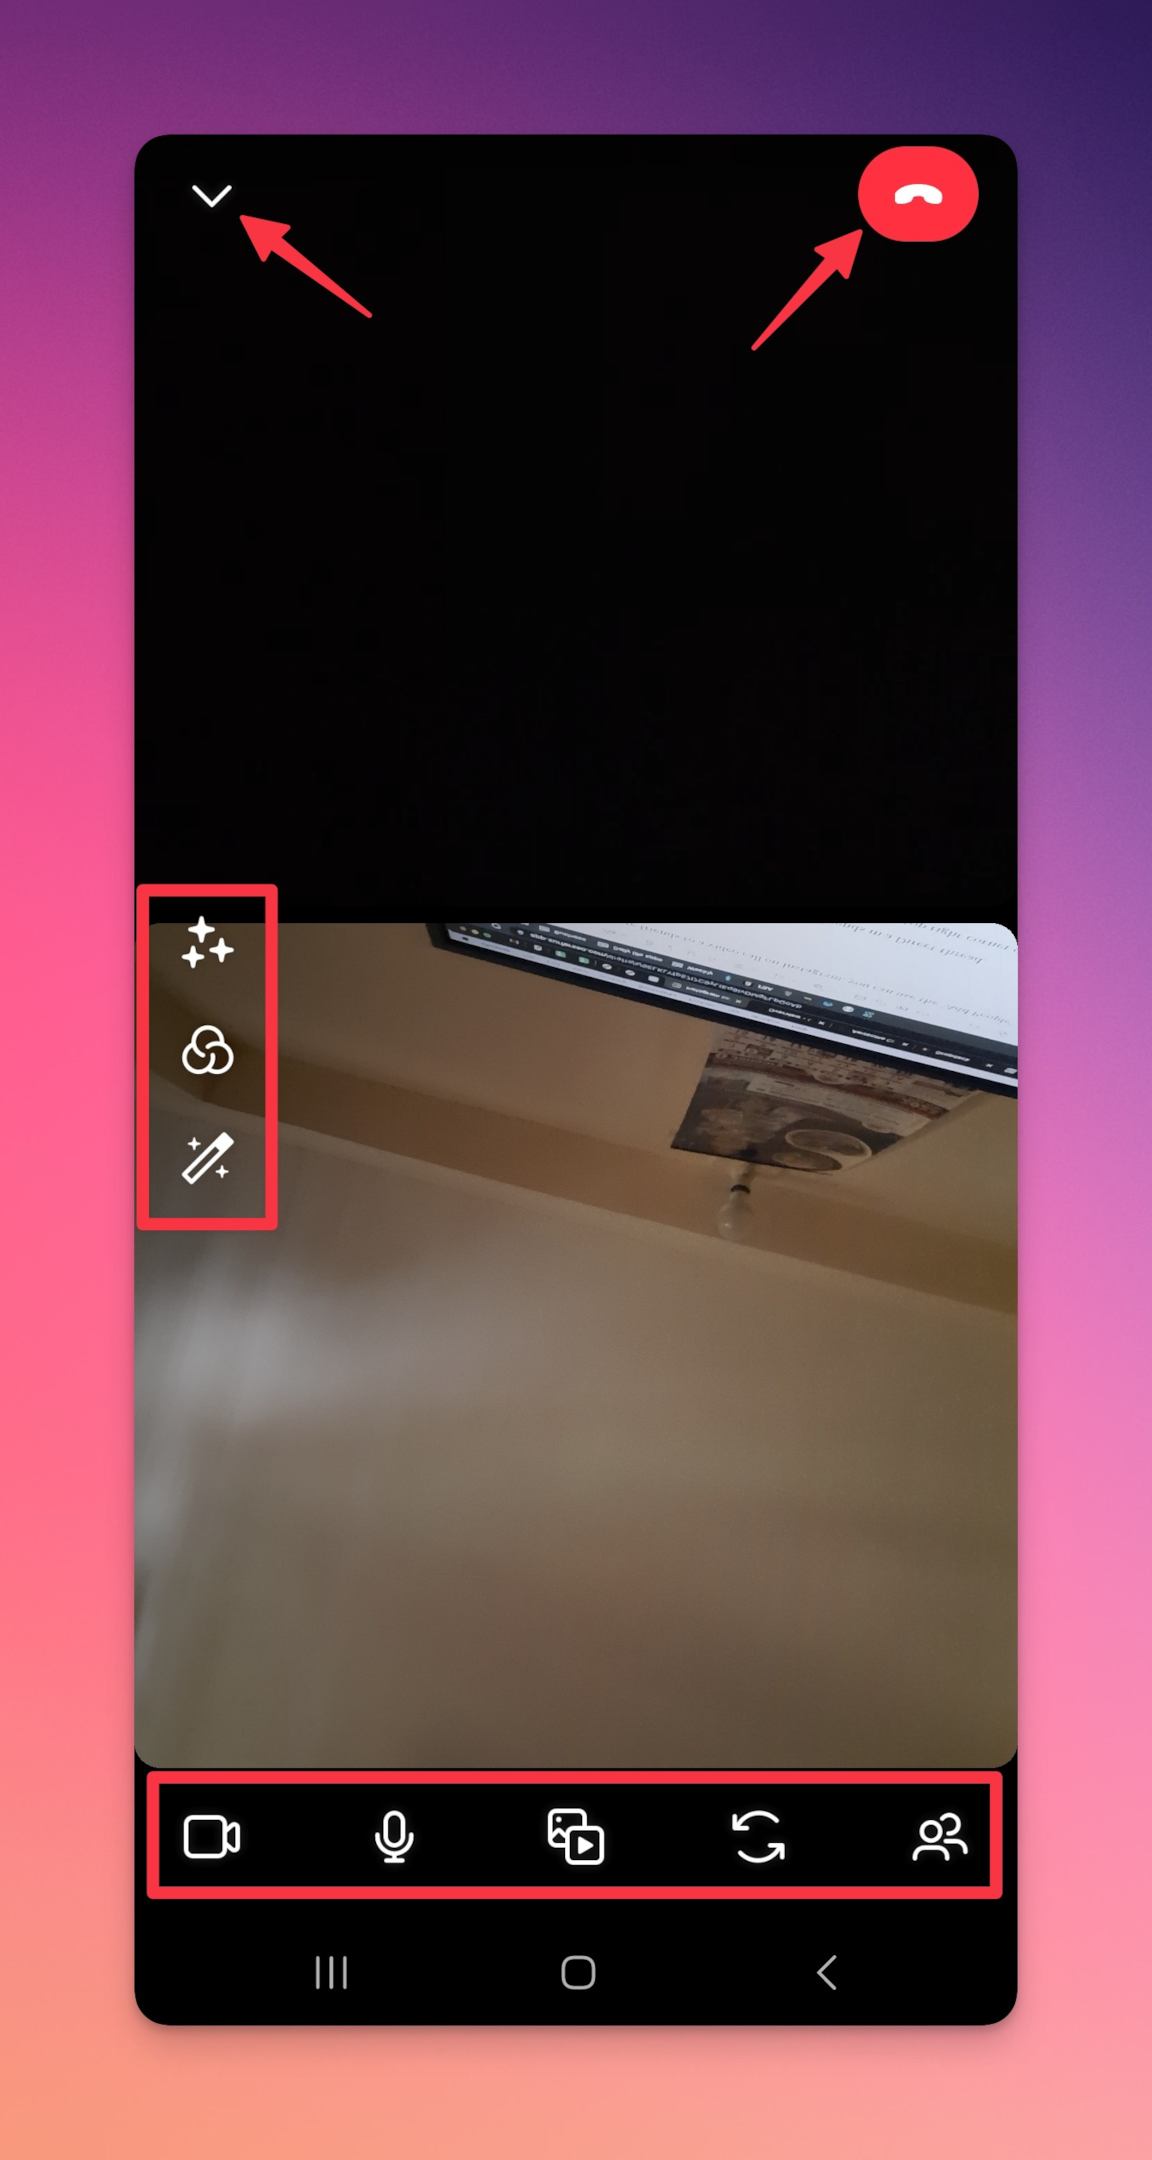 Remote.tools shows to tap on the down arrow in the top left to enable picture-in-picture mode to browse instagram feed while on an Instagram call